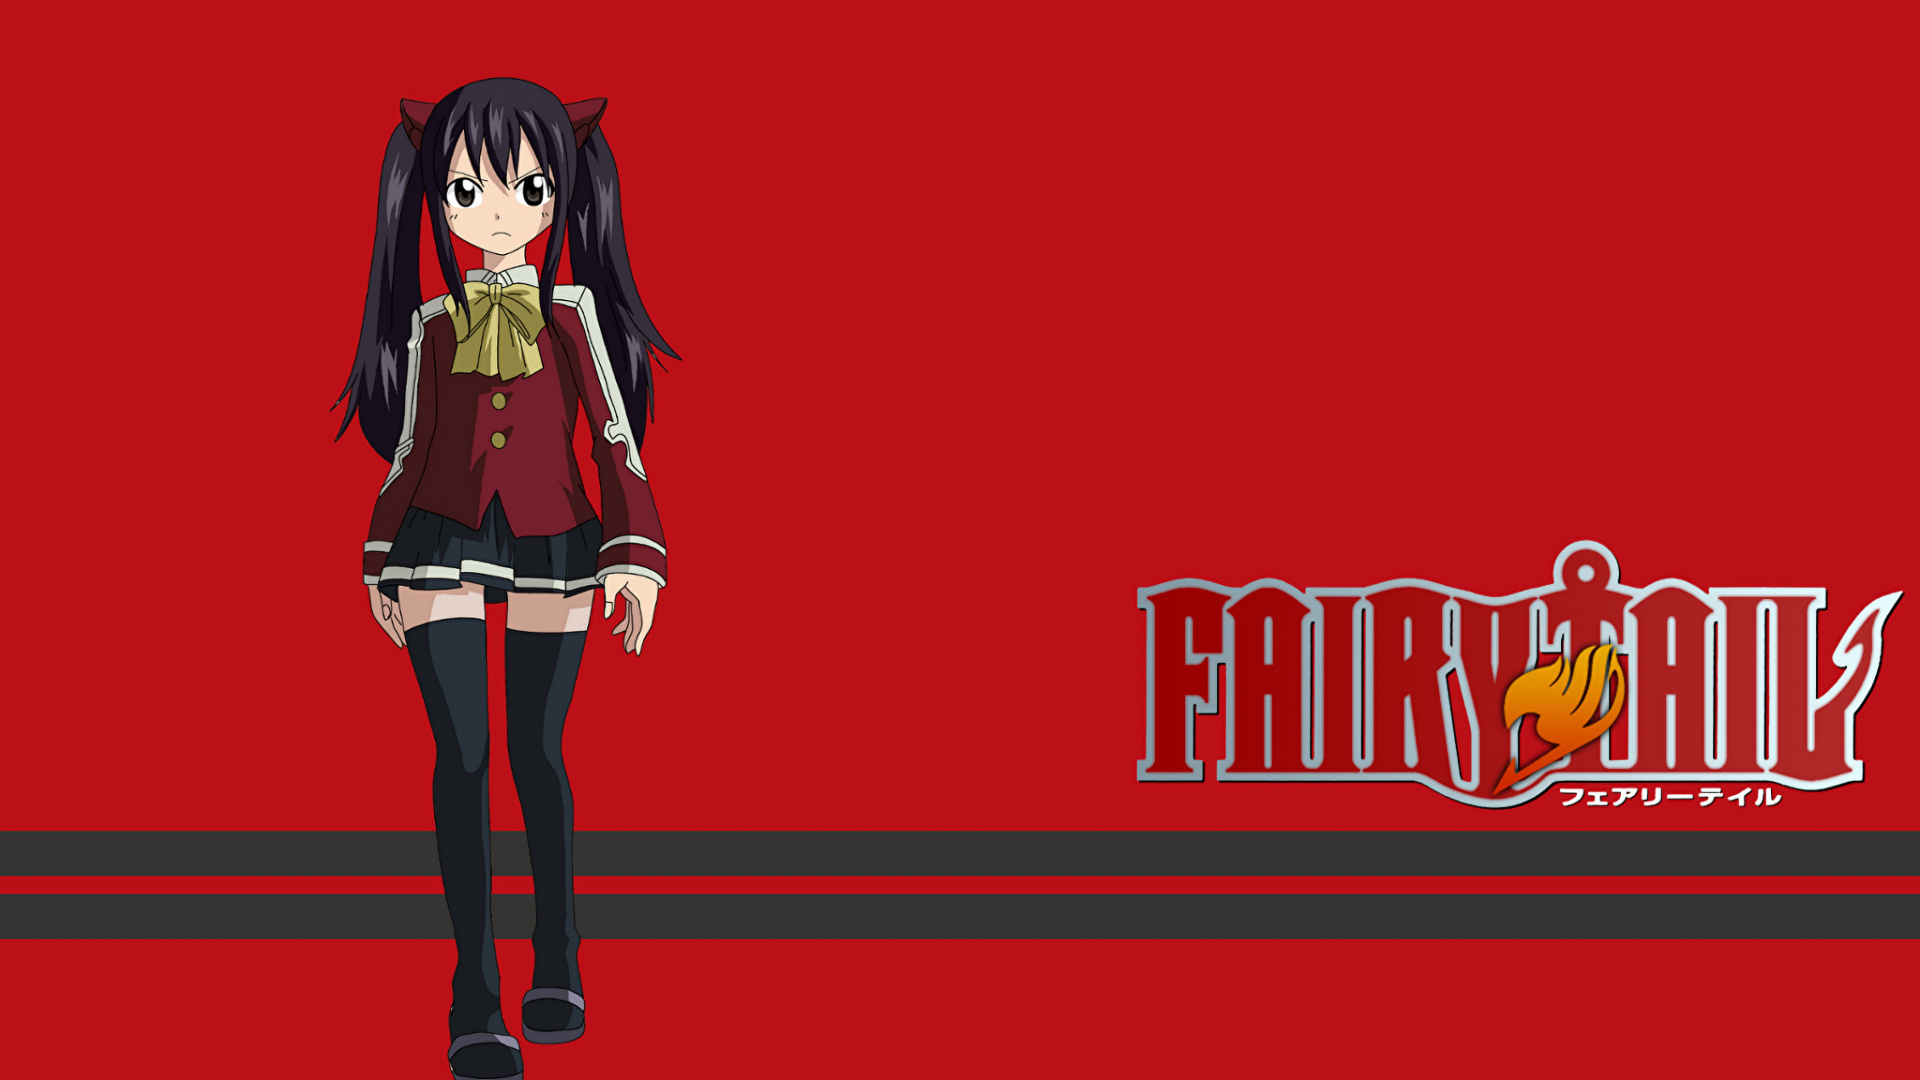 Personnage D'anime Fille Aux Cheveux Noirs. Wallpaper in 1920x1080 Resolution